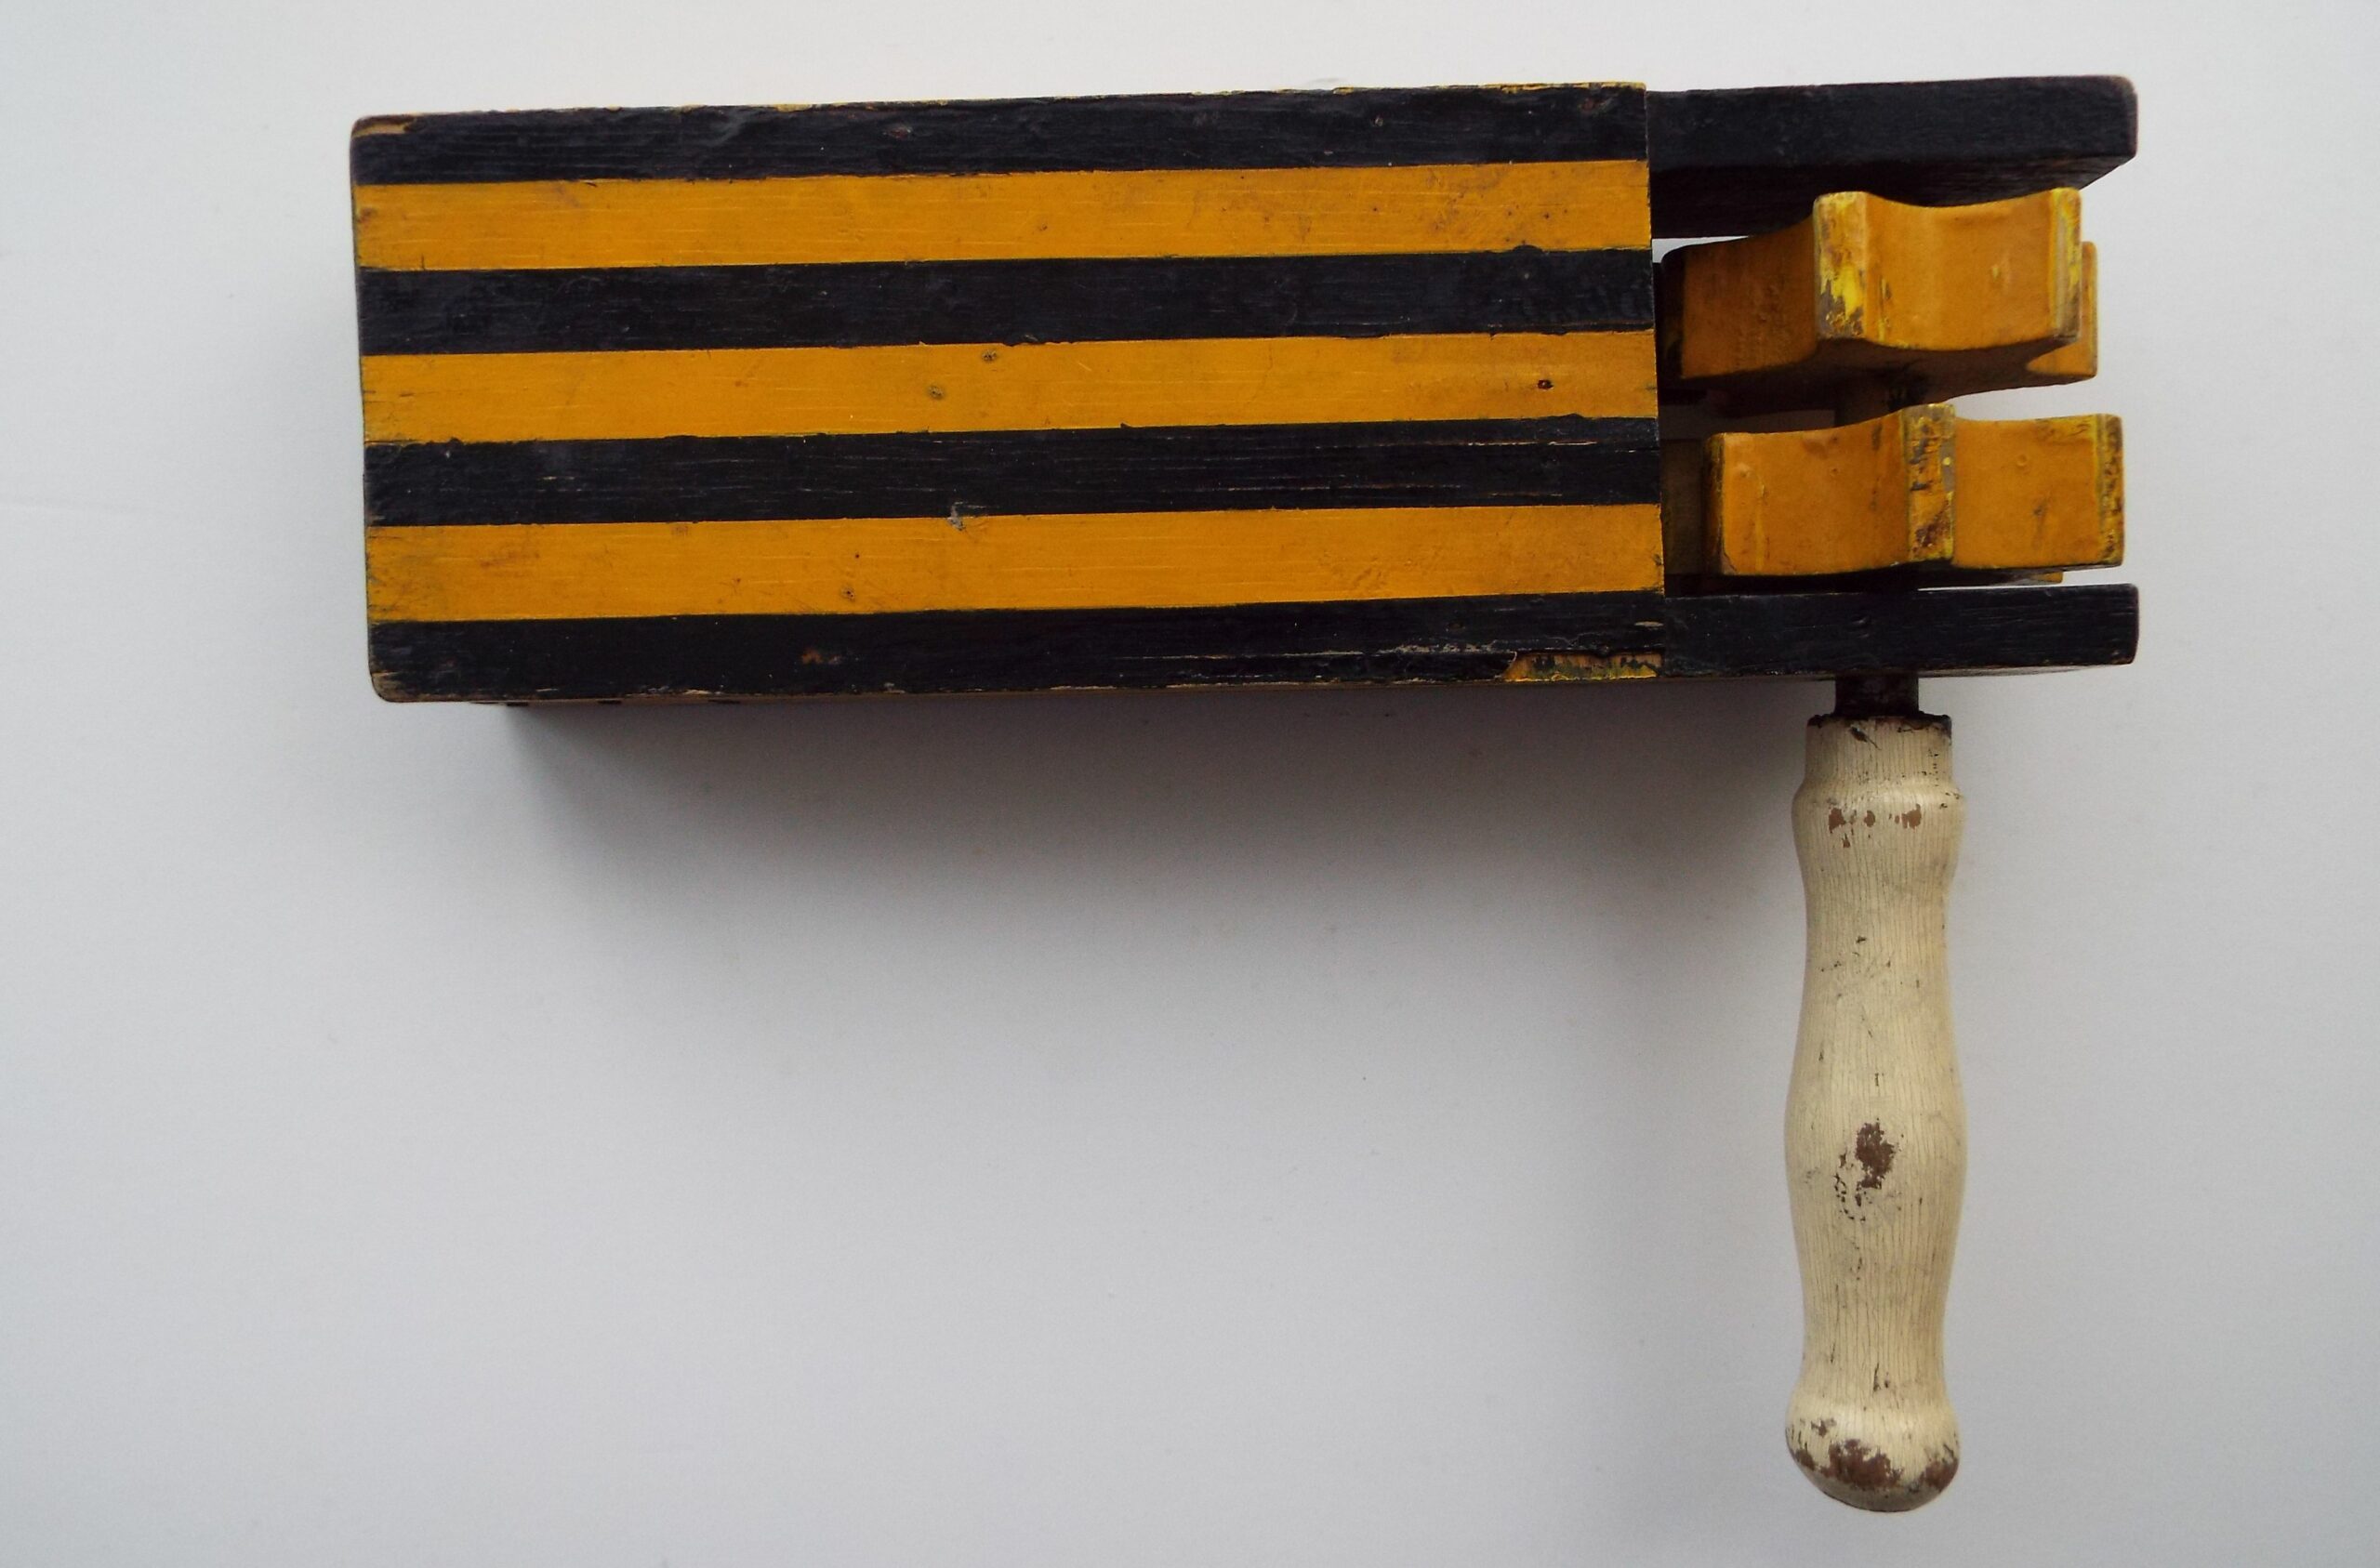 1960s Black and Amber Wooden Rattle - The Senior Tigers Club